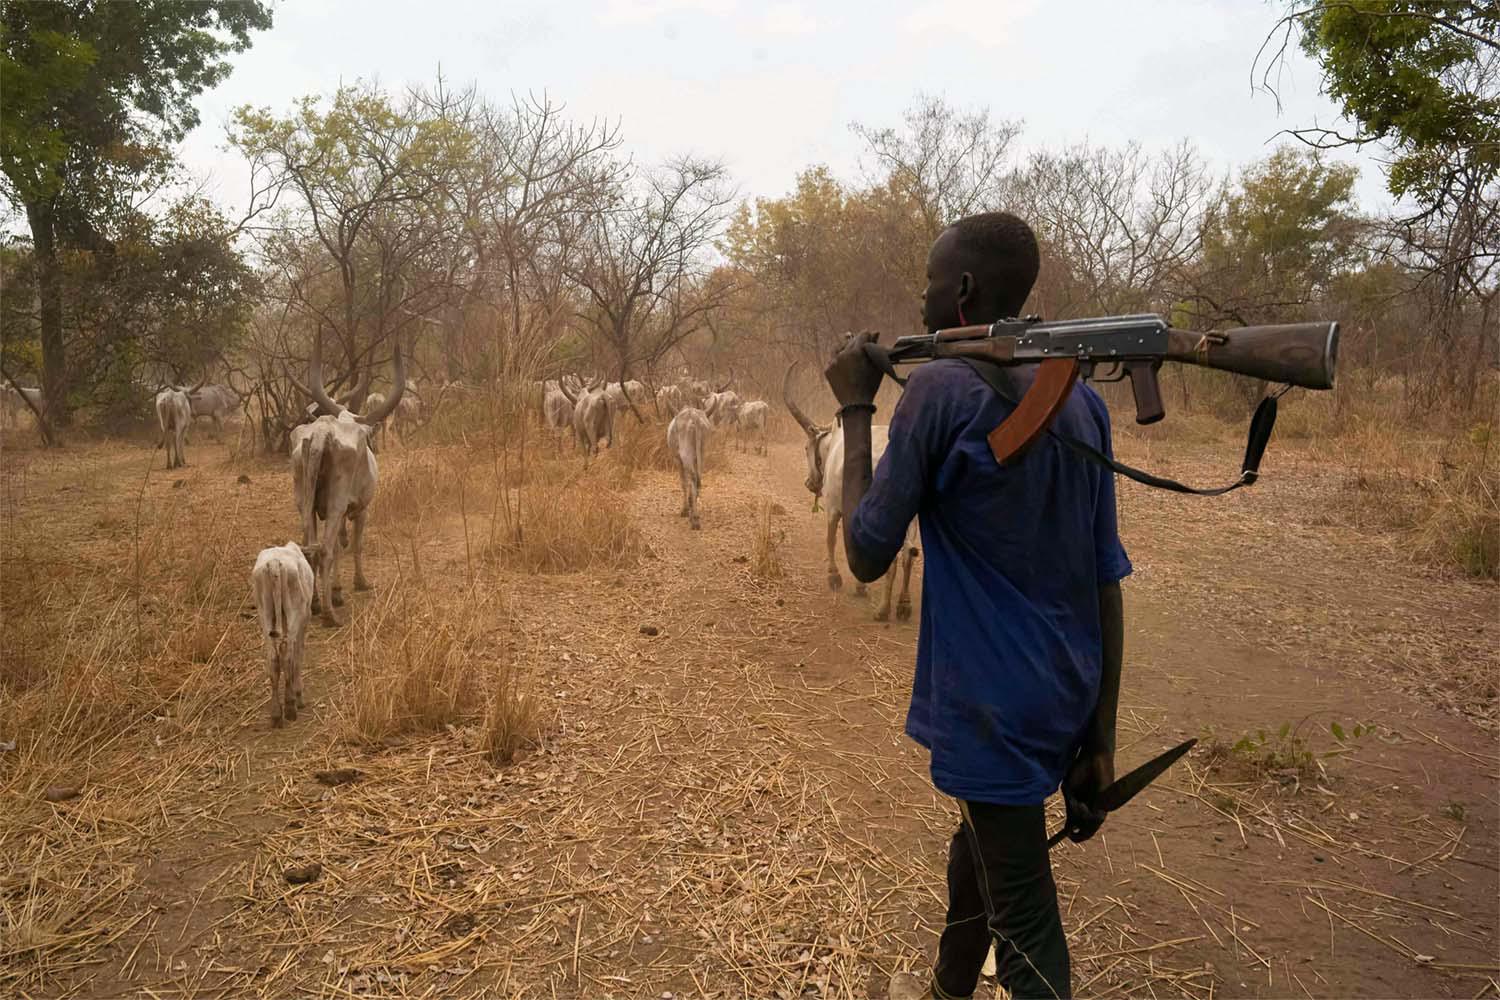 Violence is rife in parts of South Sudan where clashes triggered by domestic disputes over grazing areas, water, cultivation grounds and other resources often turn deadly